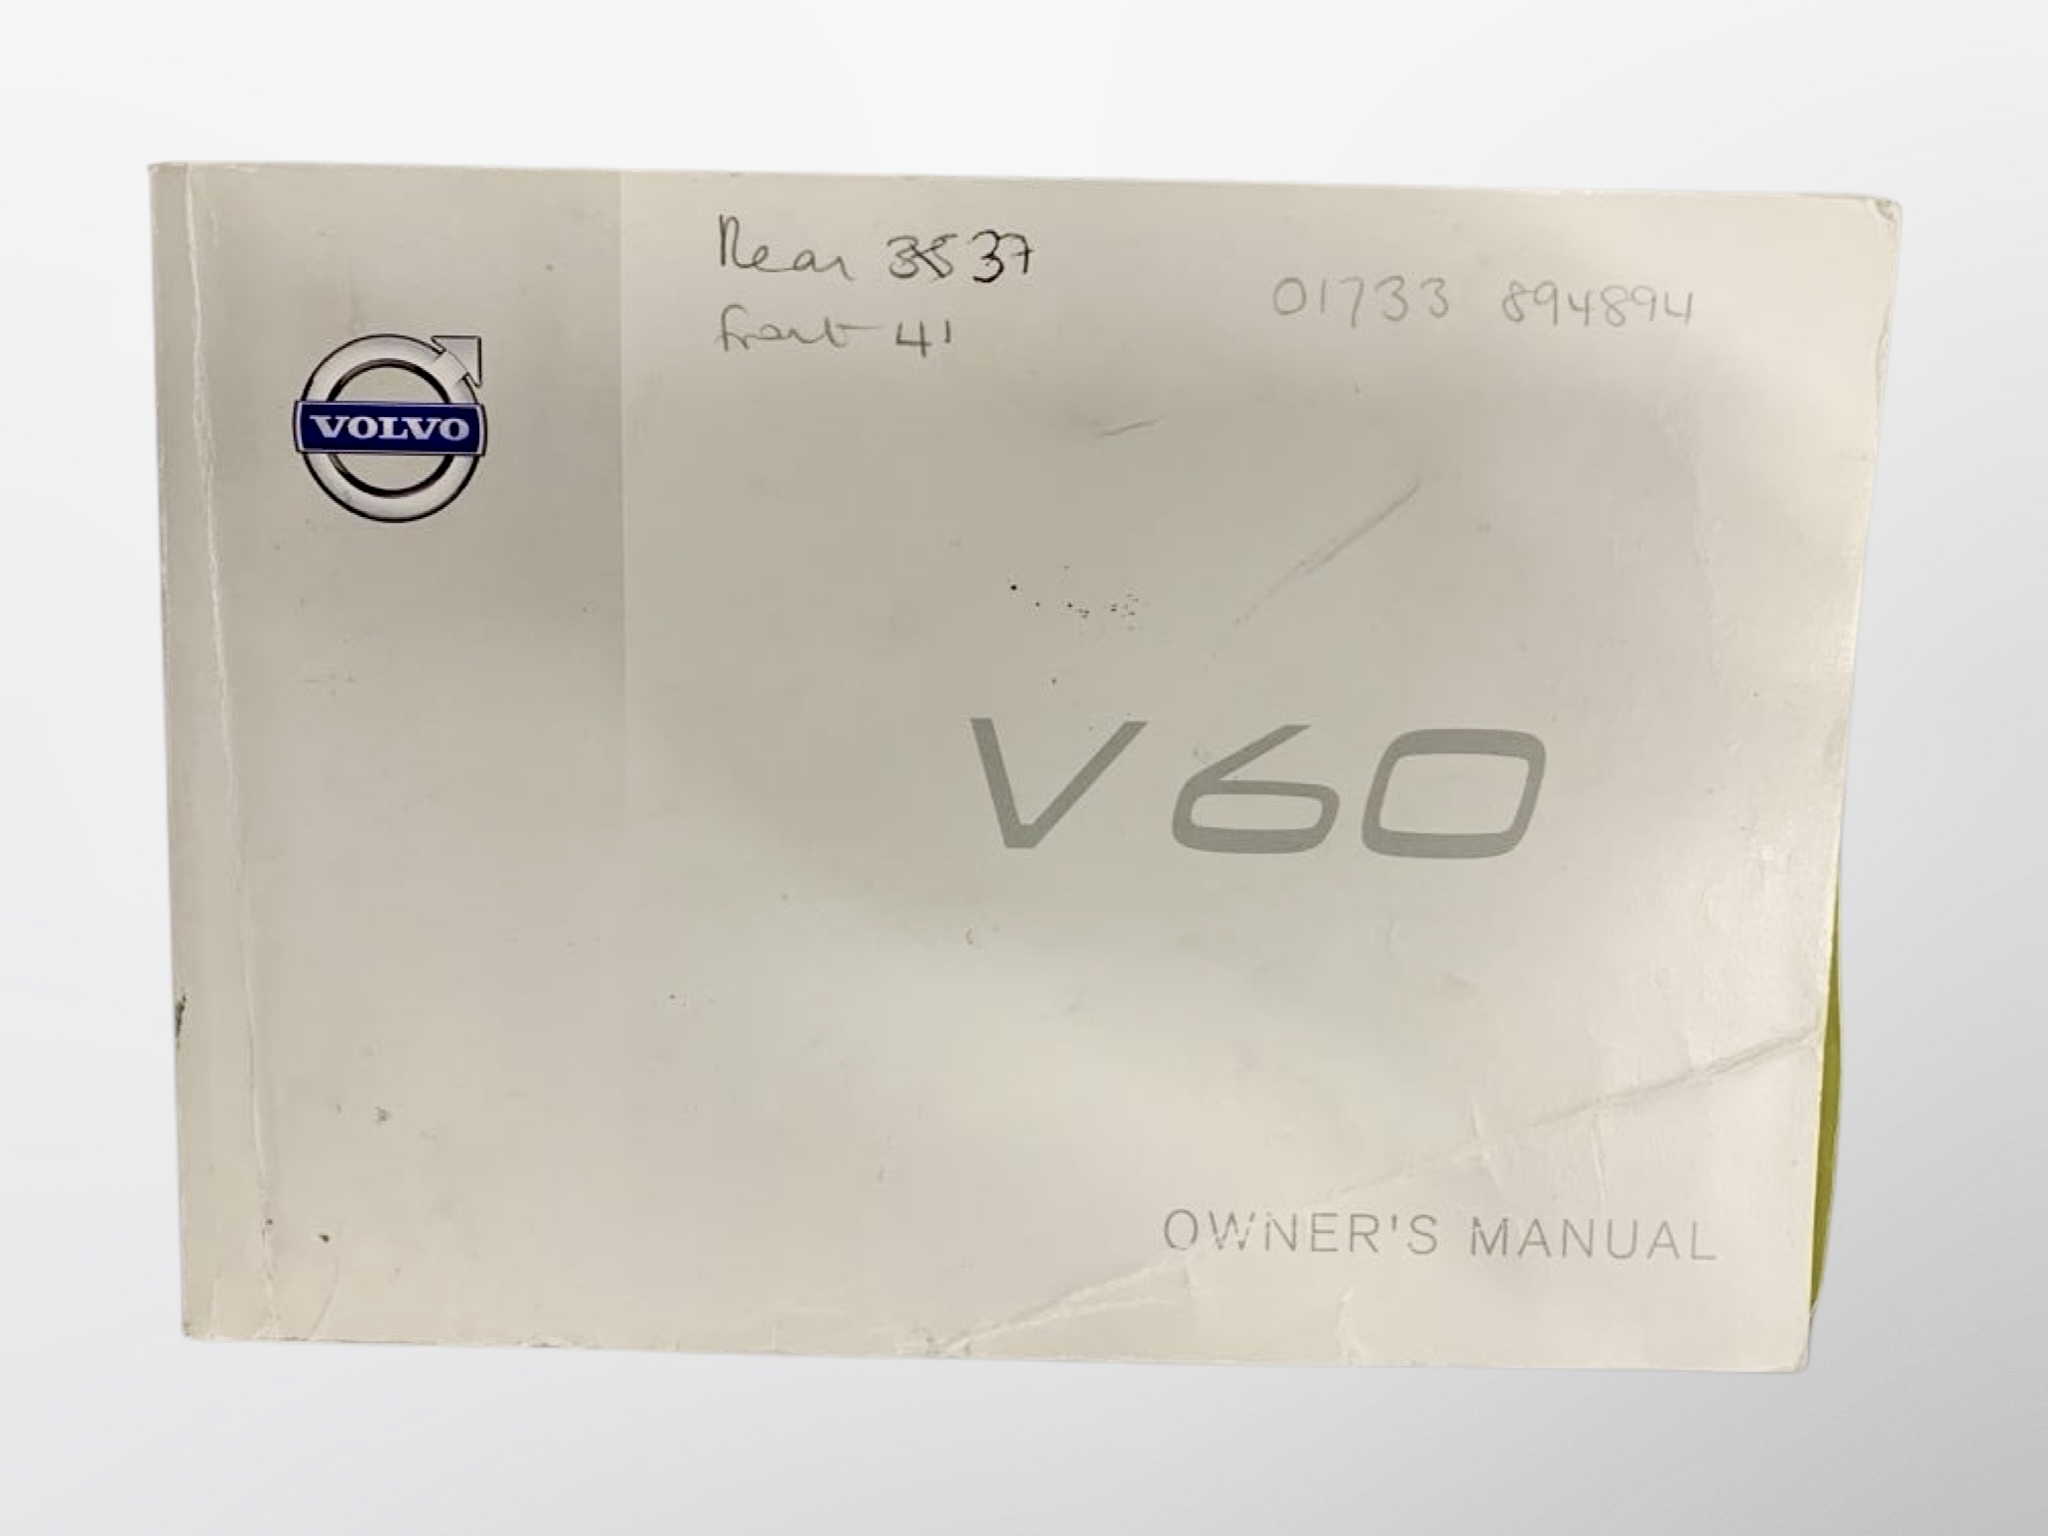 Ten Driver's Manuals/Owner Booklets in Original Wallets : 6 x DS Automobiles and 4 x Volvo.